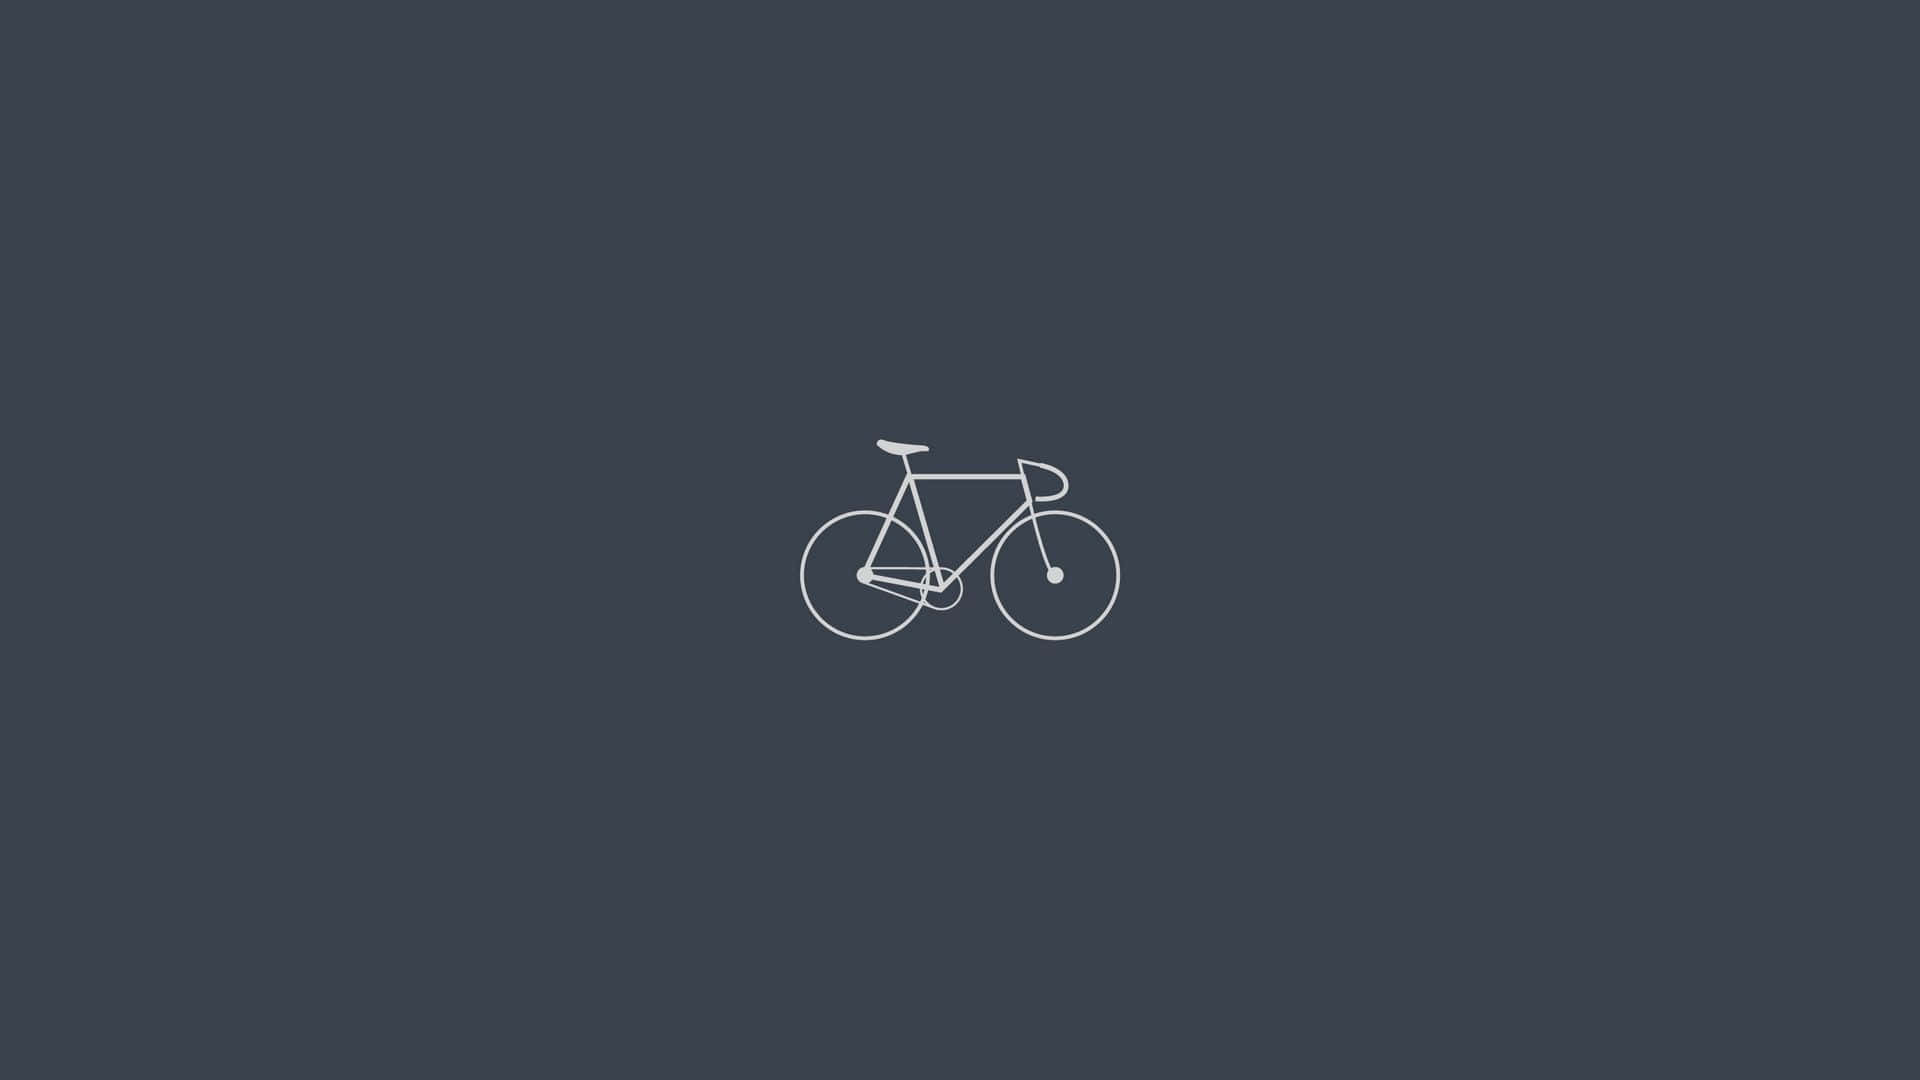 A Bicycle Icon On A Dark Background Wallpaper